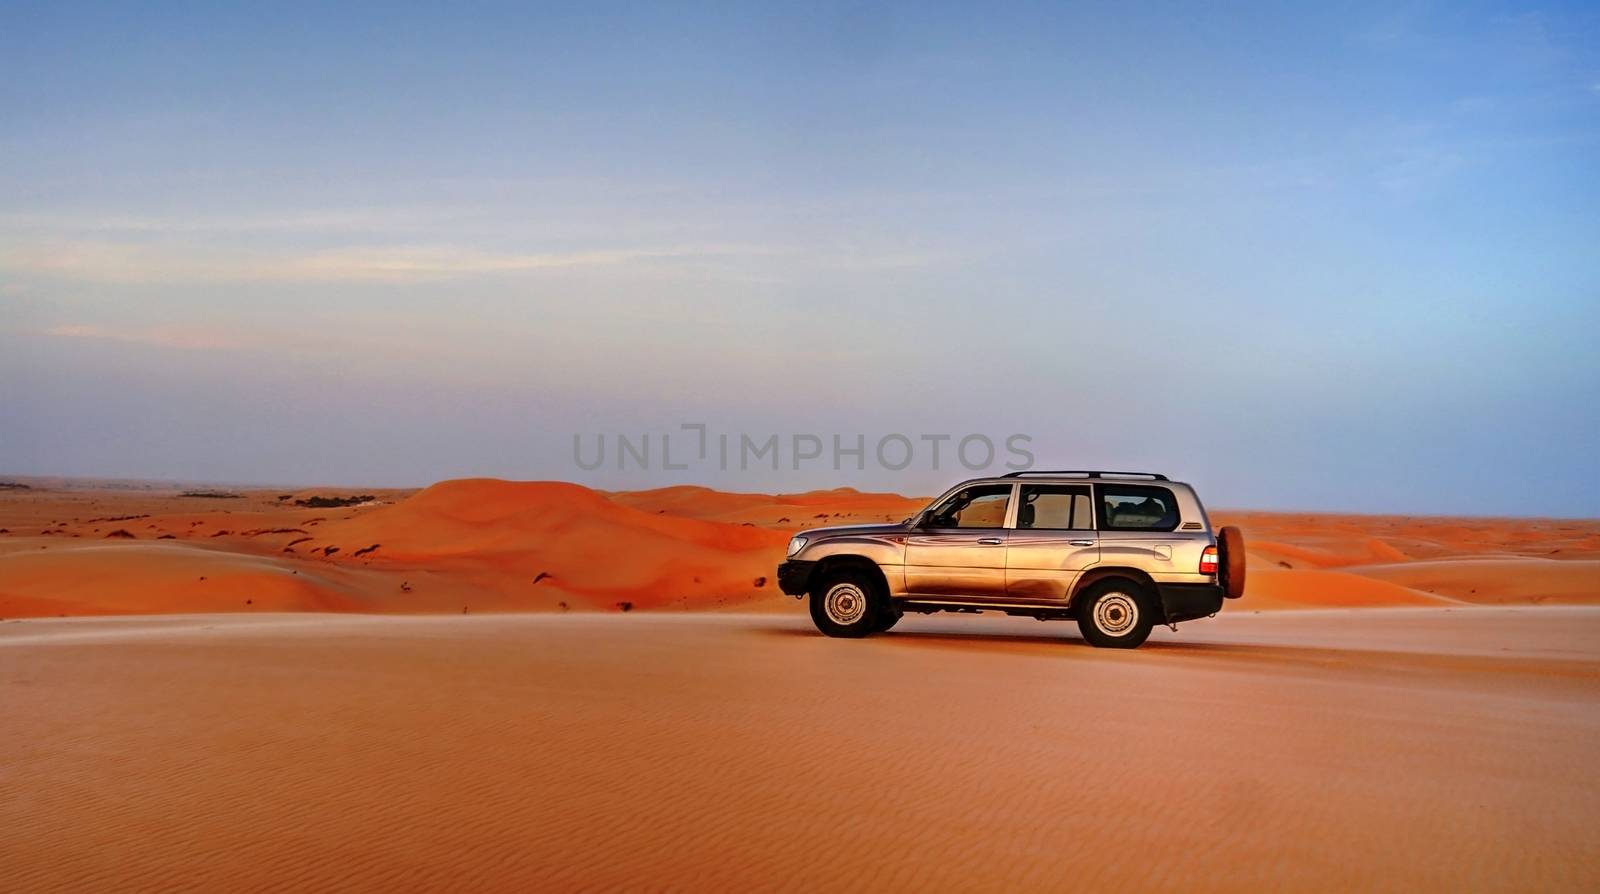 Jeep at the top of the Sahara dune